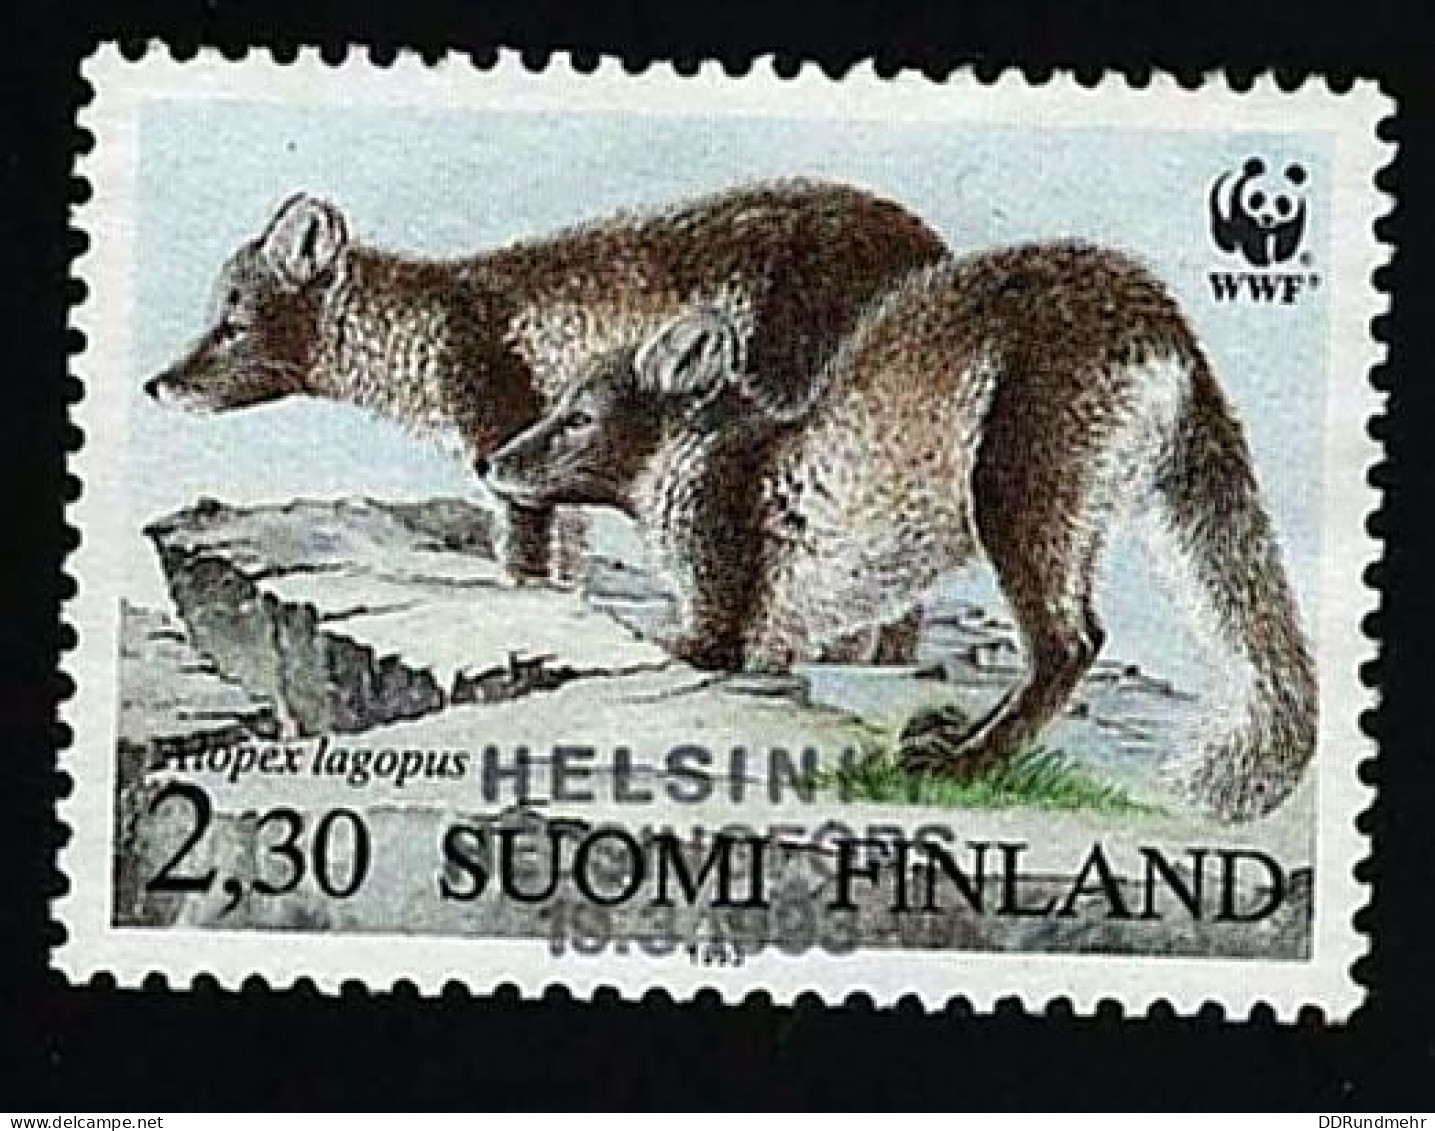 1993 Arctic Fox   Michel FI 1205 Stamp Number FI 907d Yvert Et Tellier FI 1169   First Day Stamp Used - Oblitérés